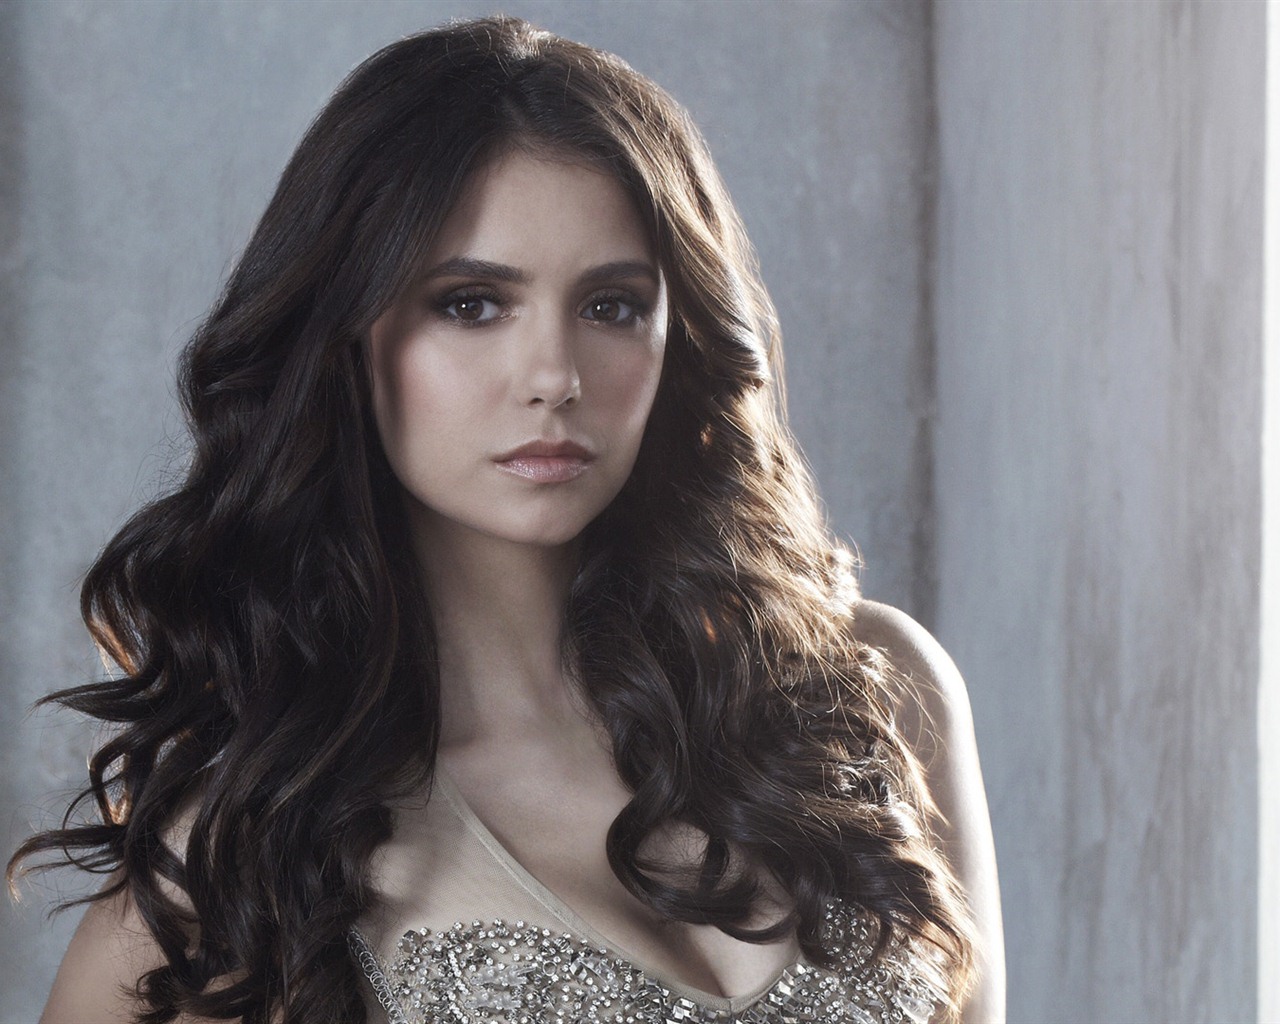 The Vampire Diaries HD Wallpapers #15 - 1280x1024